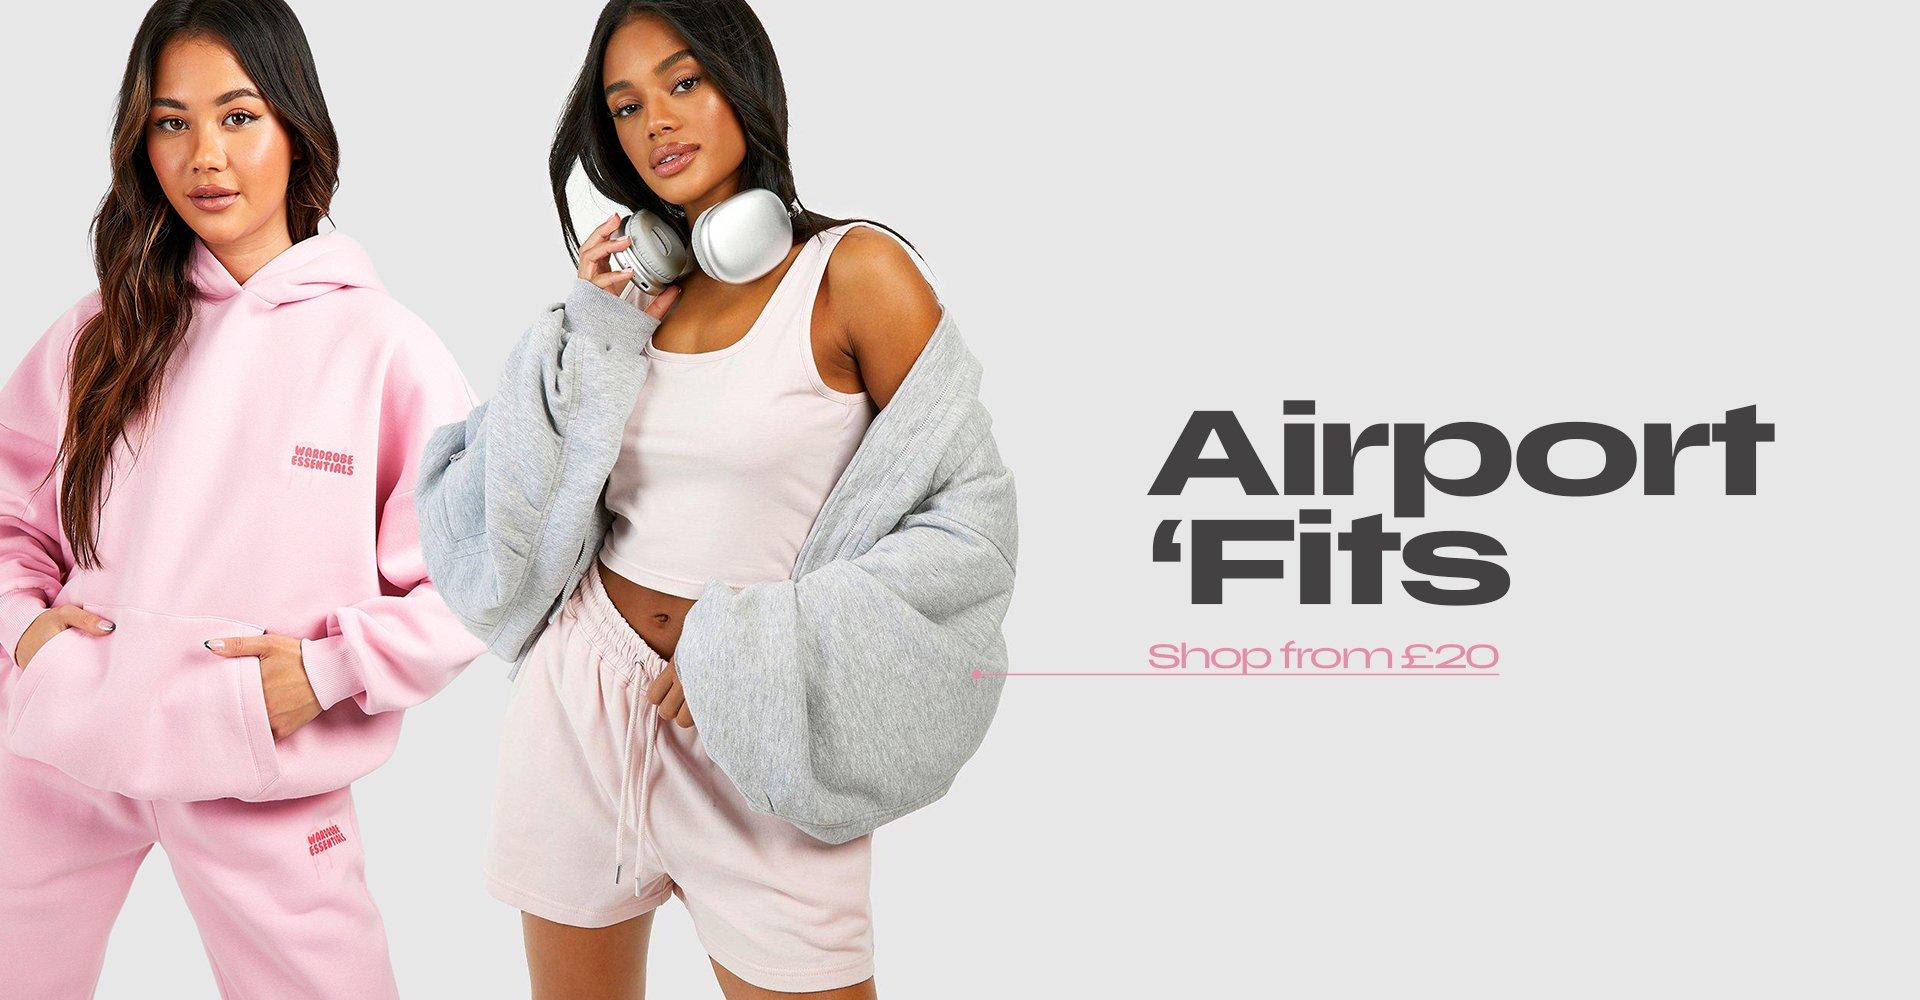 AIRPORT FITS FROM £20